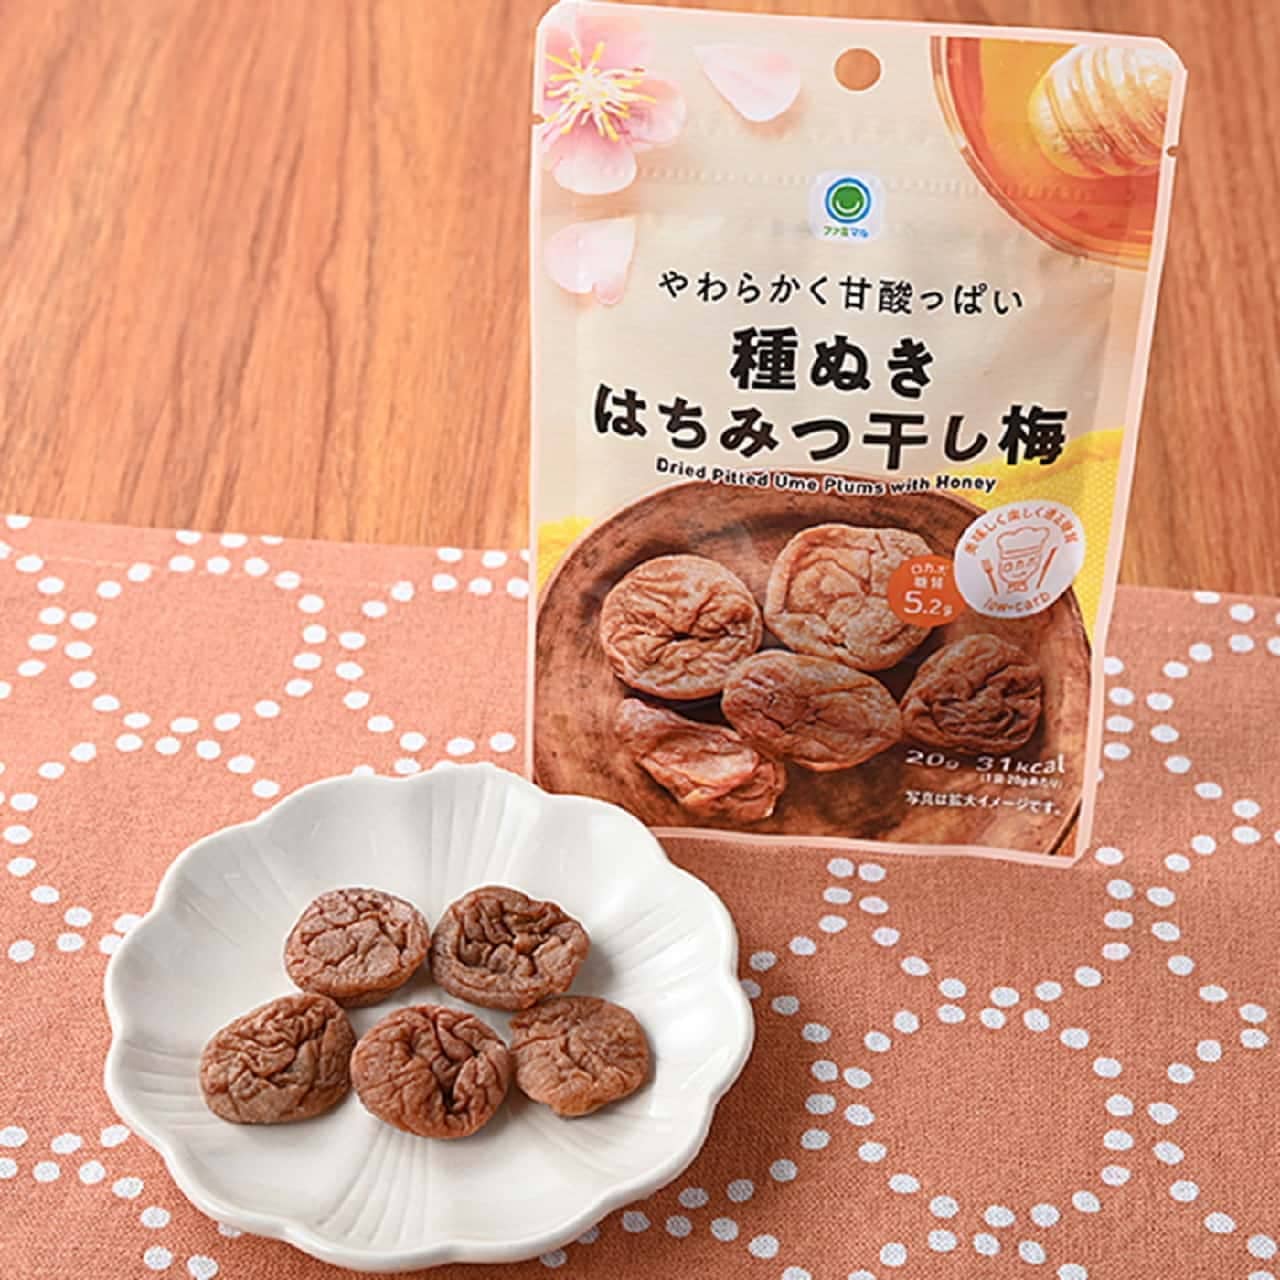 Famima "Soft, sweet and sour seedless honey dried ume".